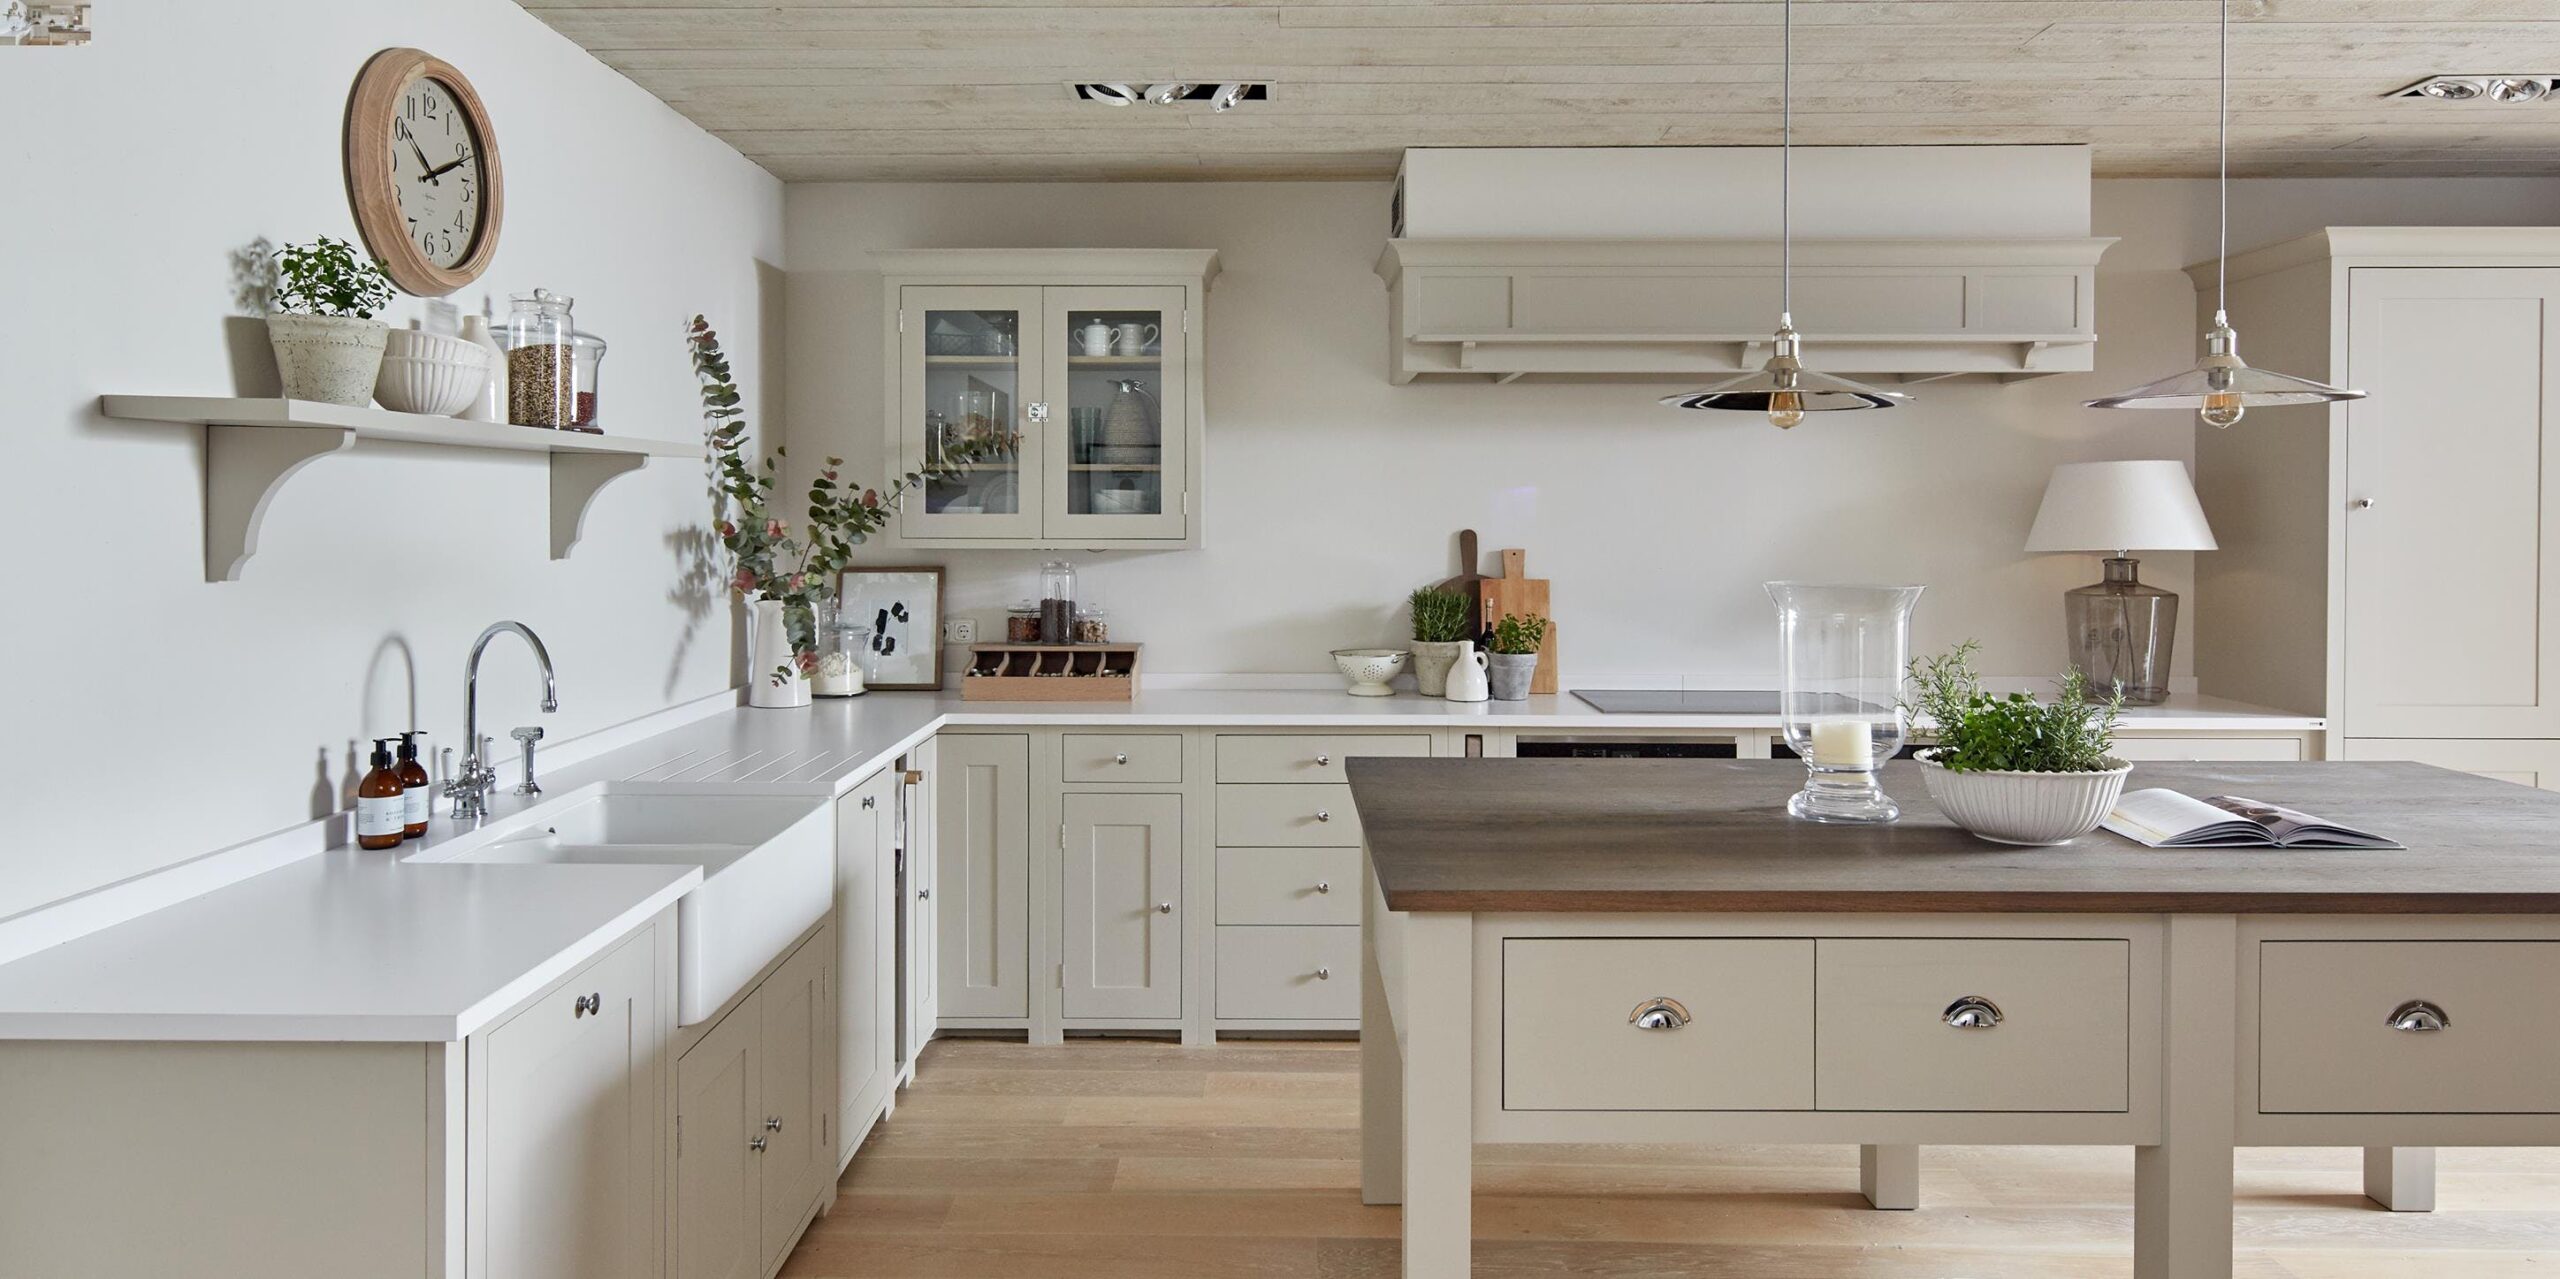 Image of Rustic kitchen 0 2 scaled in Inspiration - Cosentino